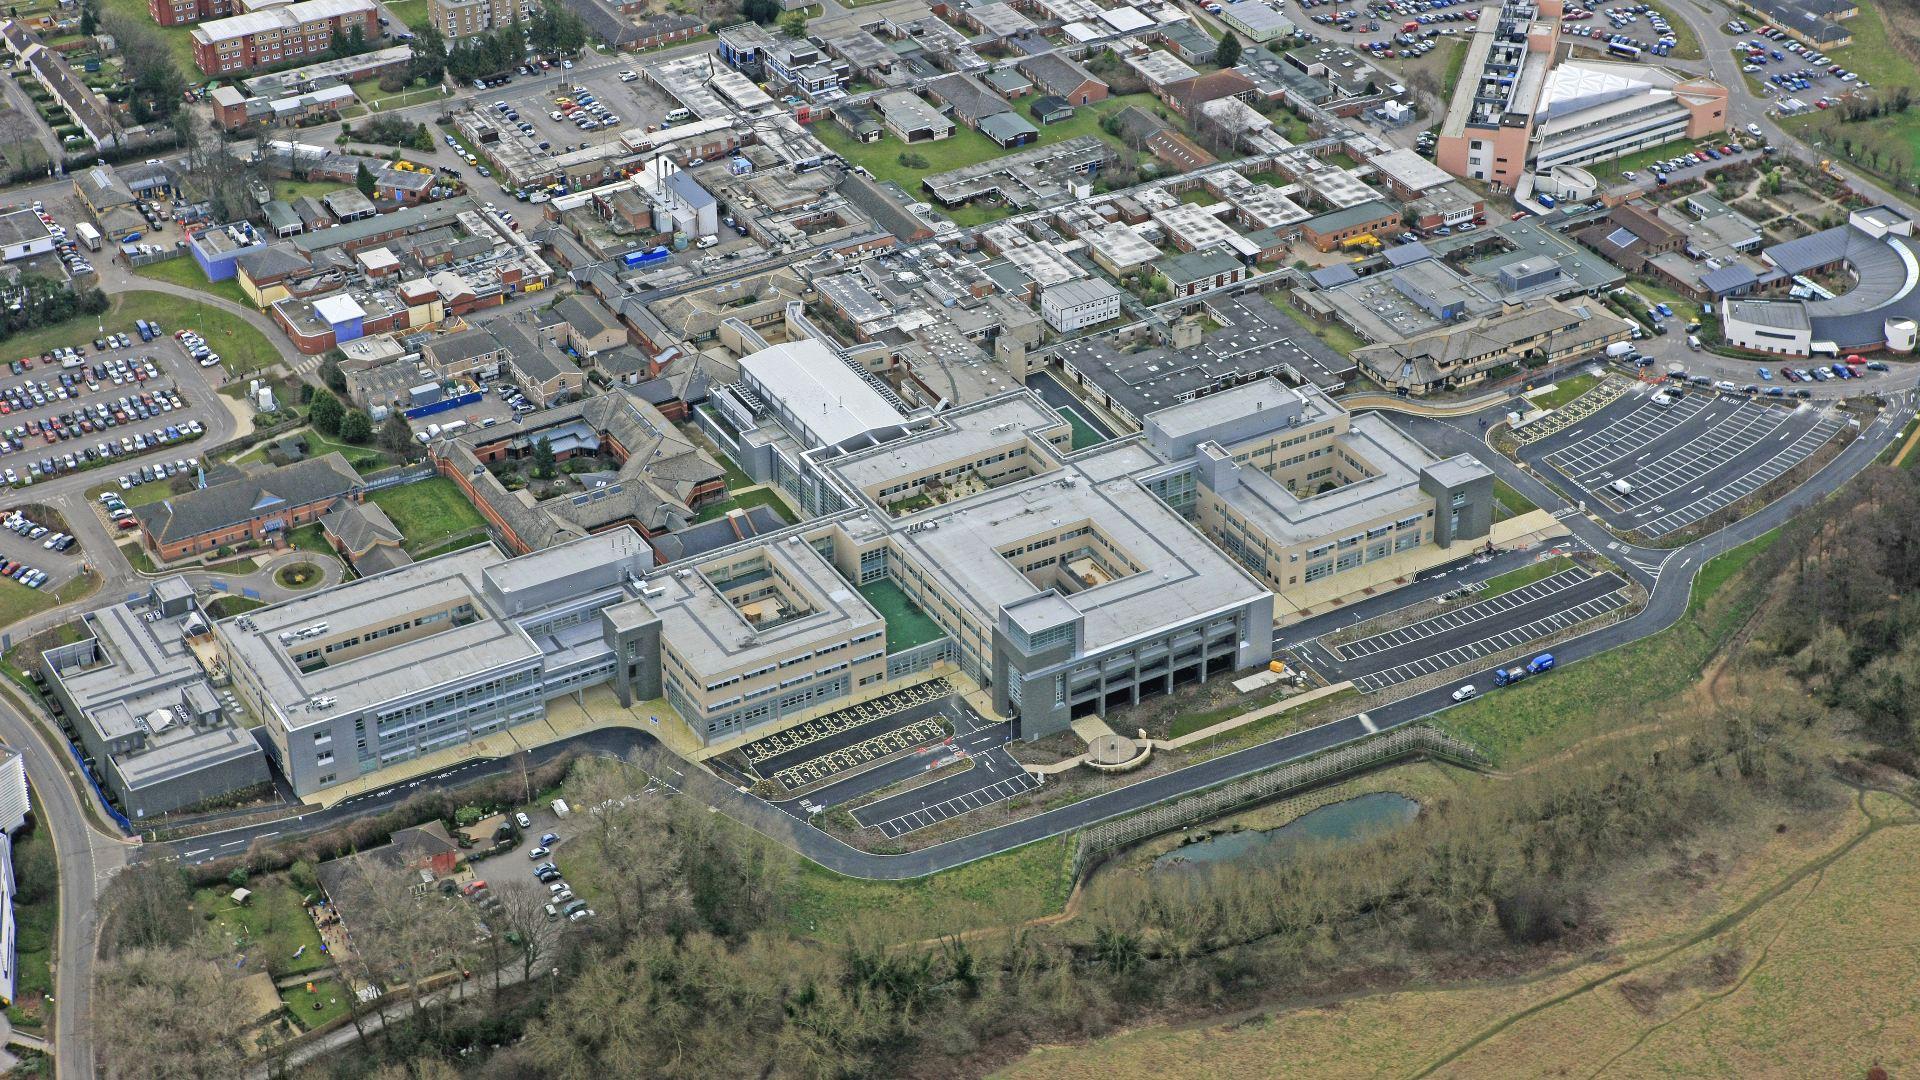 Churchill Hospital in Oxford, New Oncology Centre